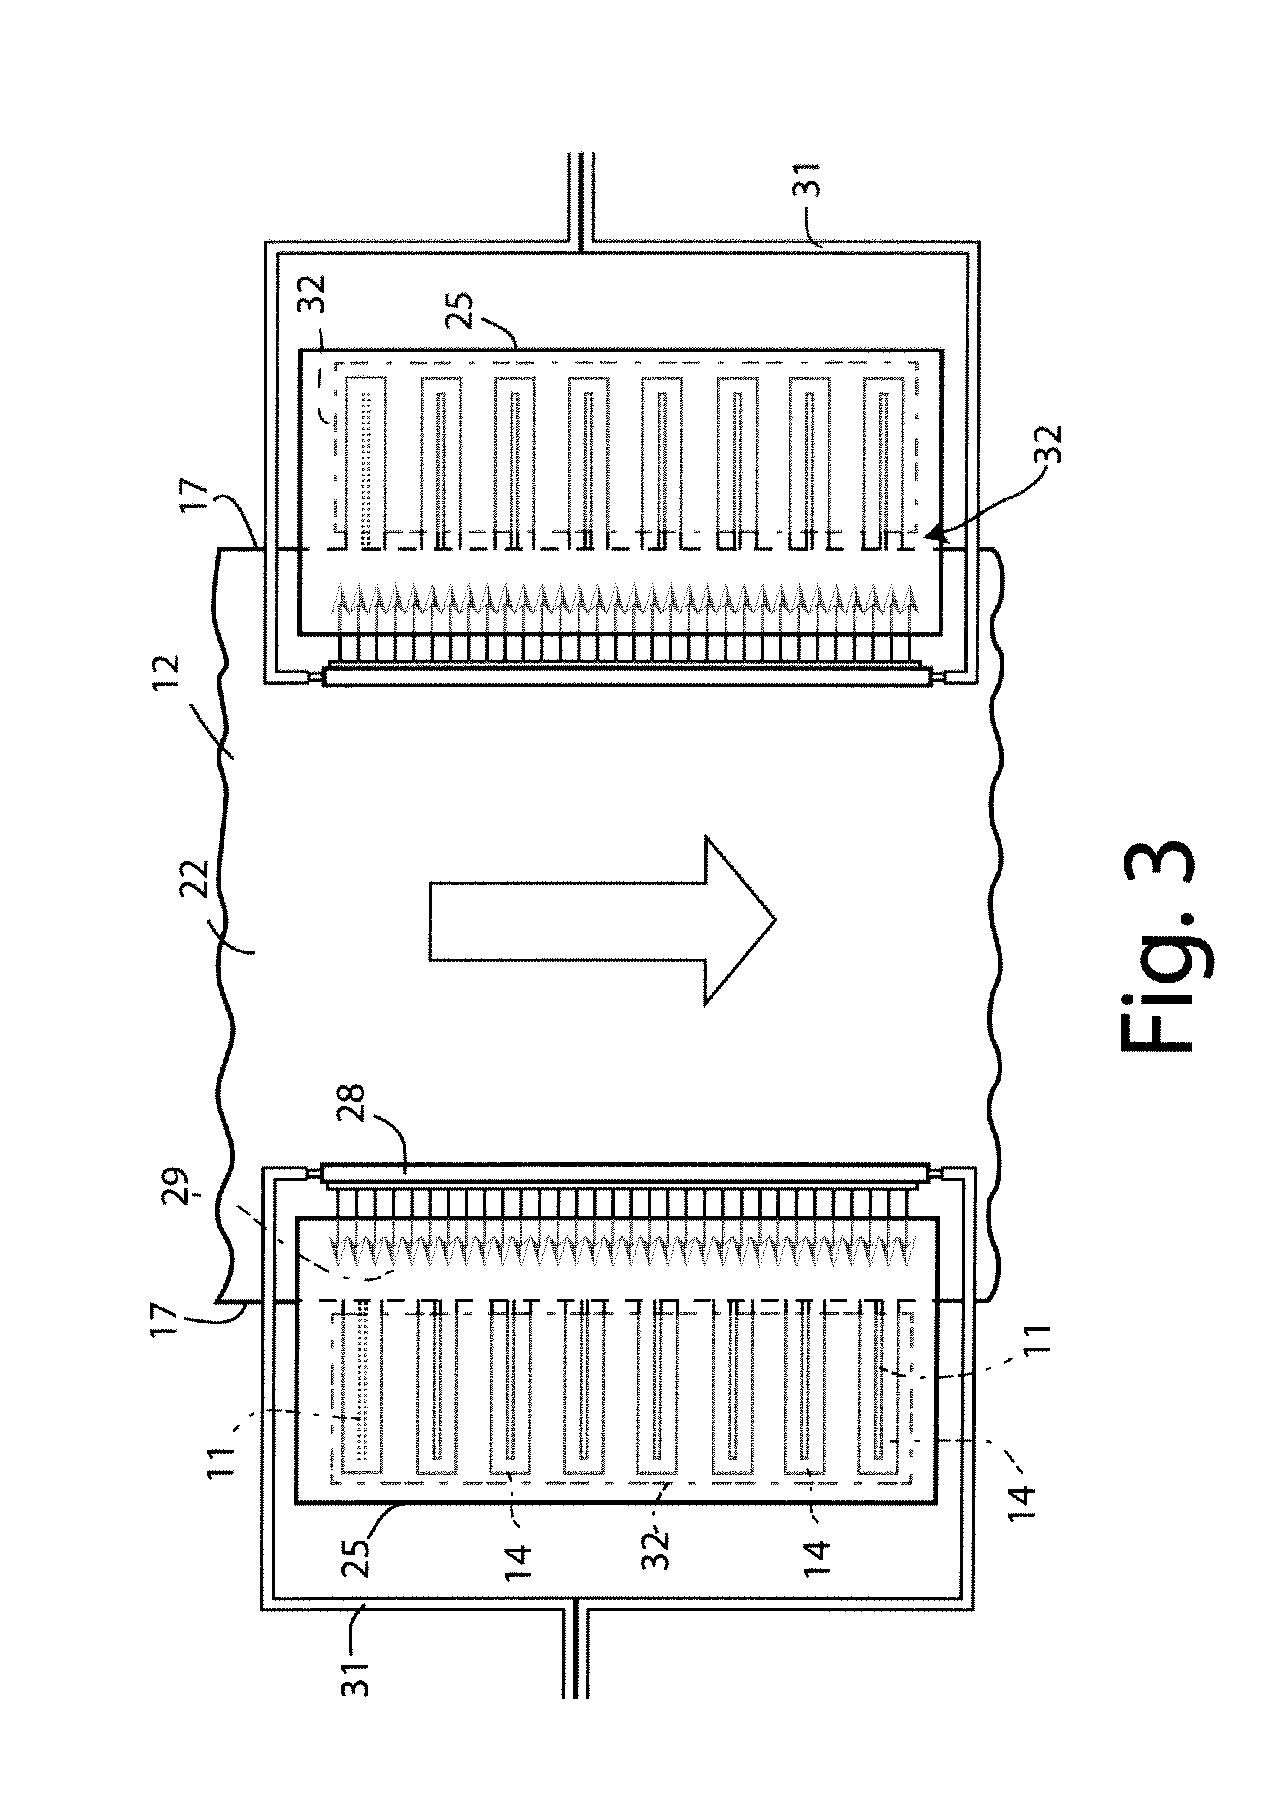 Method and apparatus for removing coolant liquid from moving metal strip